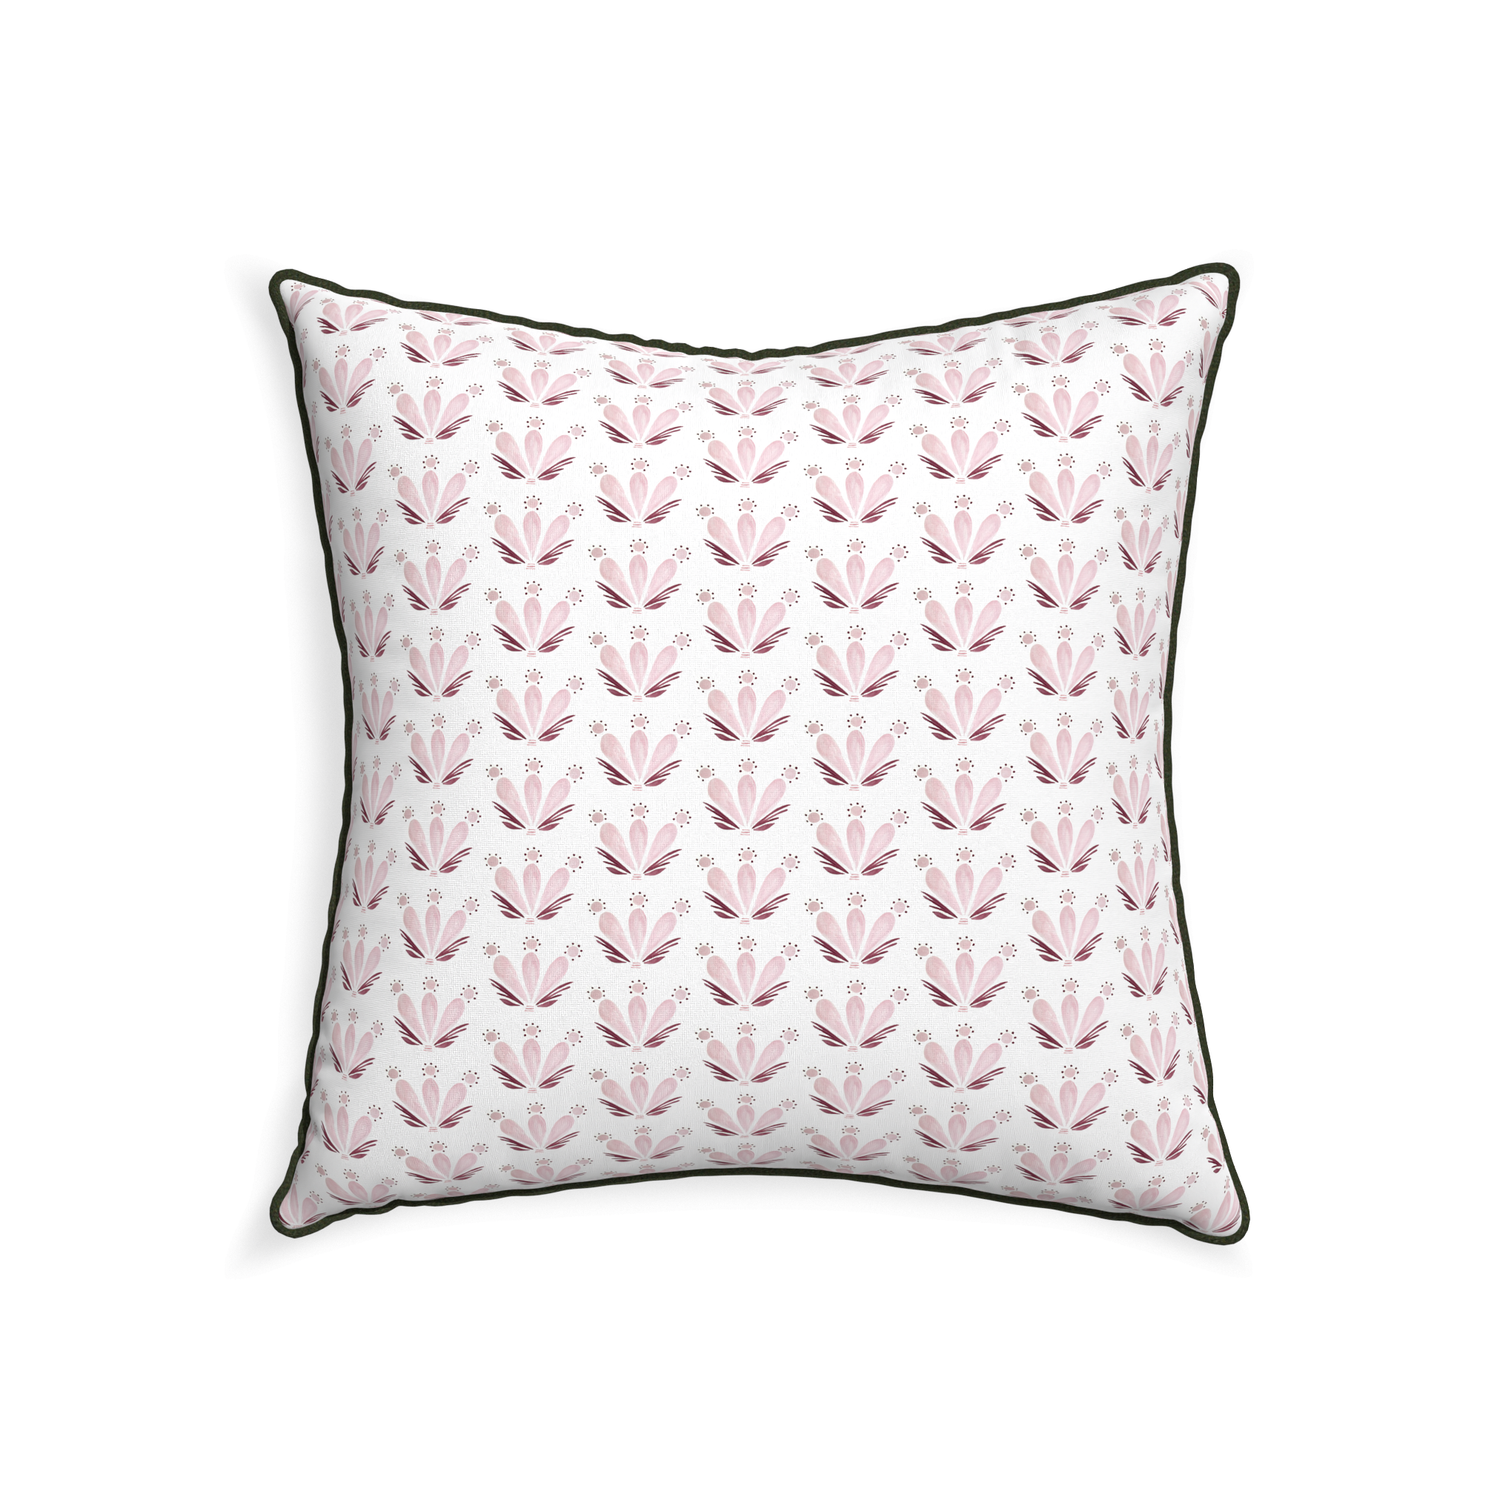 22-square serena pink custom pink & burgundy drop repeat floralpillow with f piping on white background